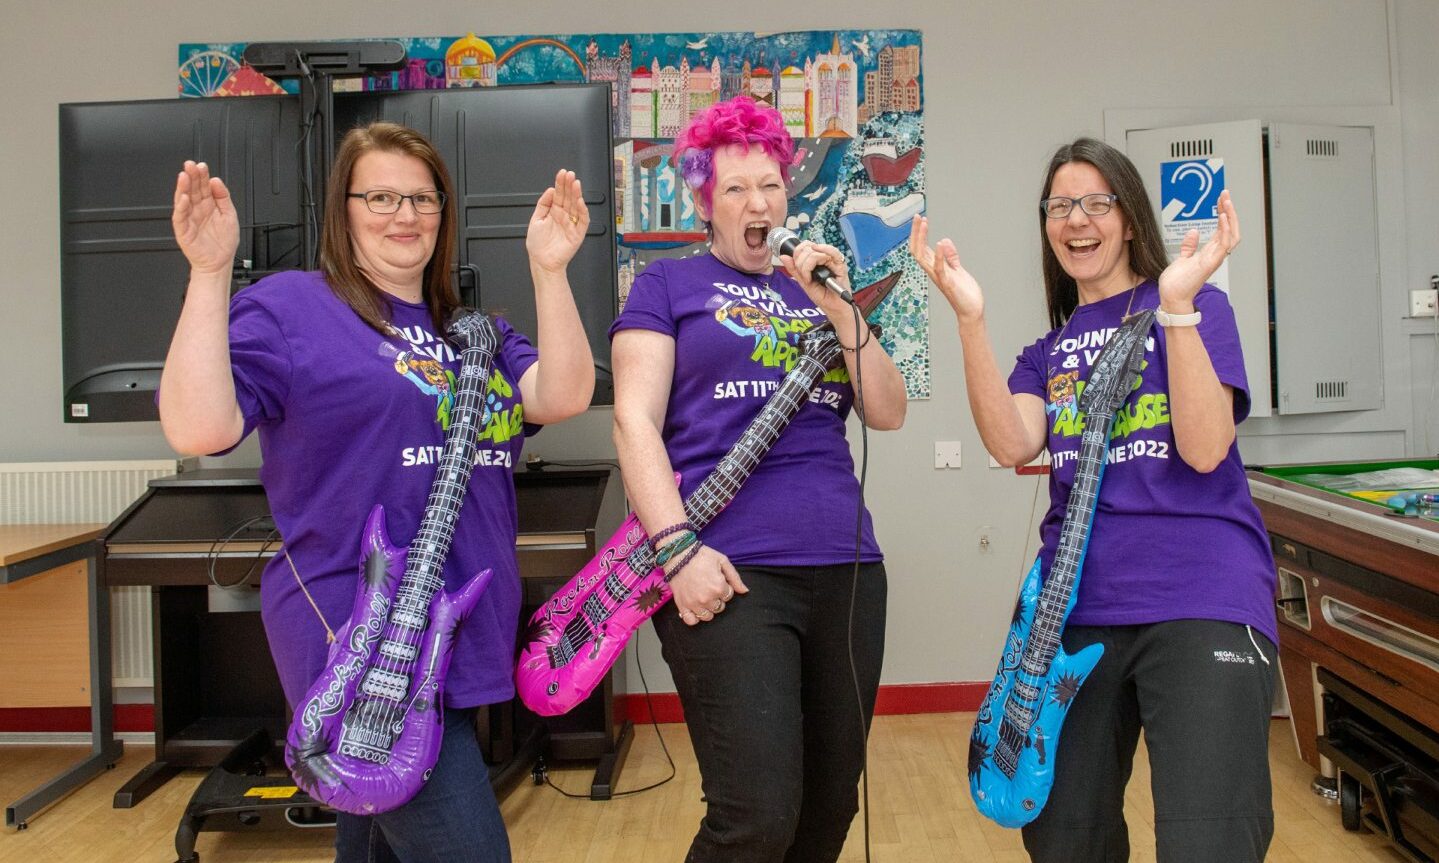 Sound and Vision group are putting on a concert to raise money for Guide dogs for the Blind and Hearing dogs for Deaf People. From left, Jill Easton, Ells McHaffie and Cath French. Picture by Kath Flannery/DCT Media.